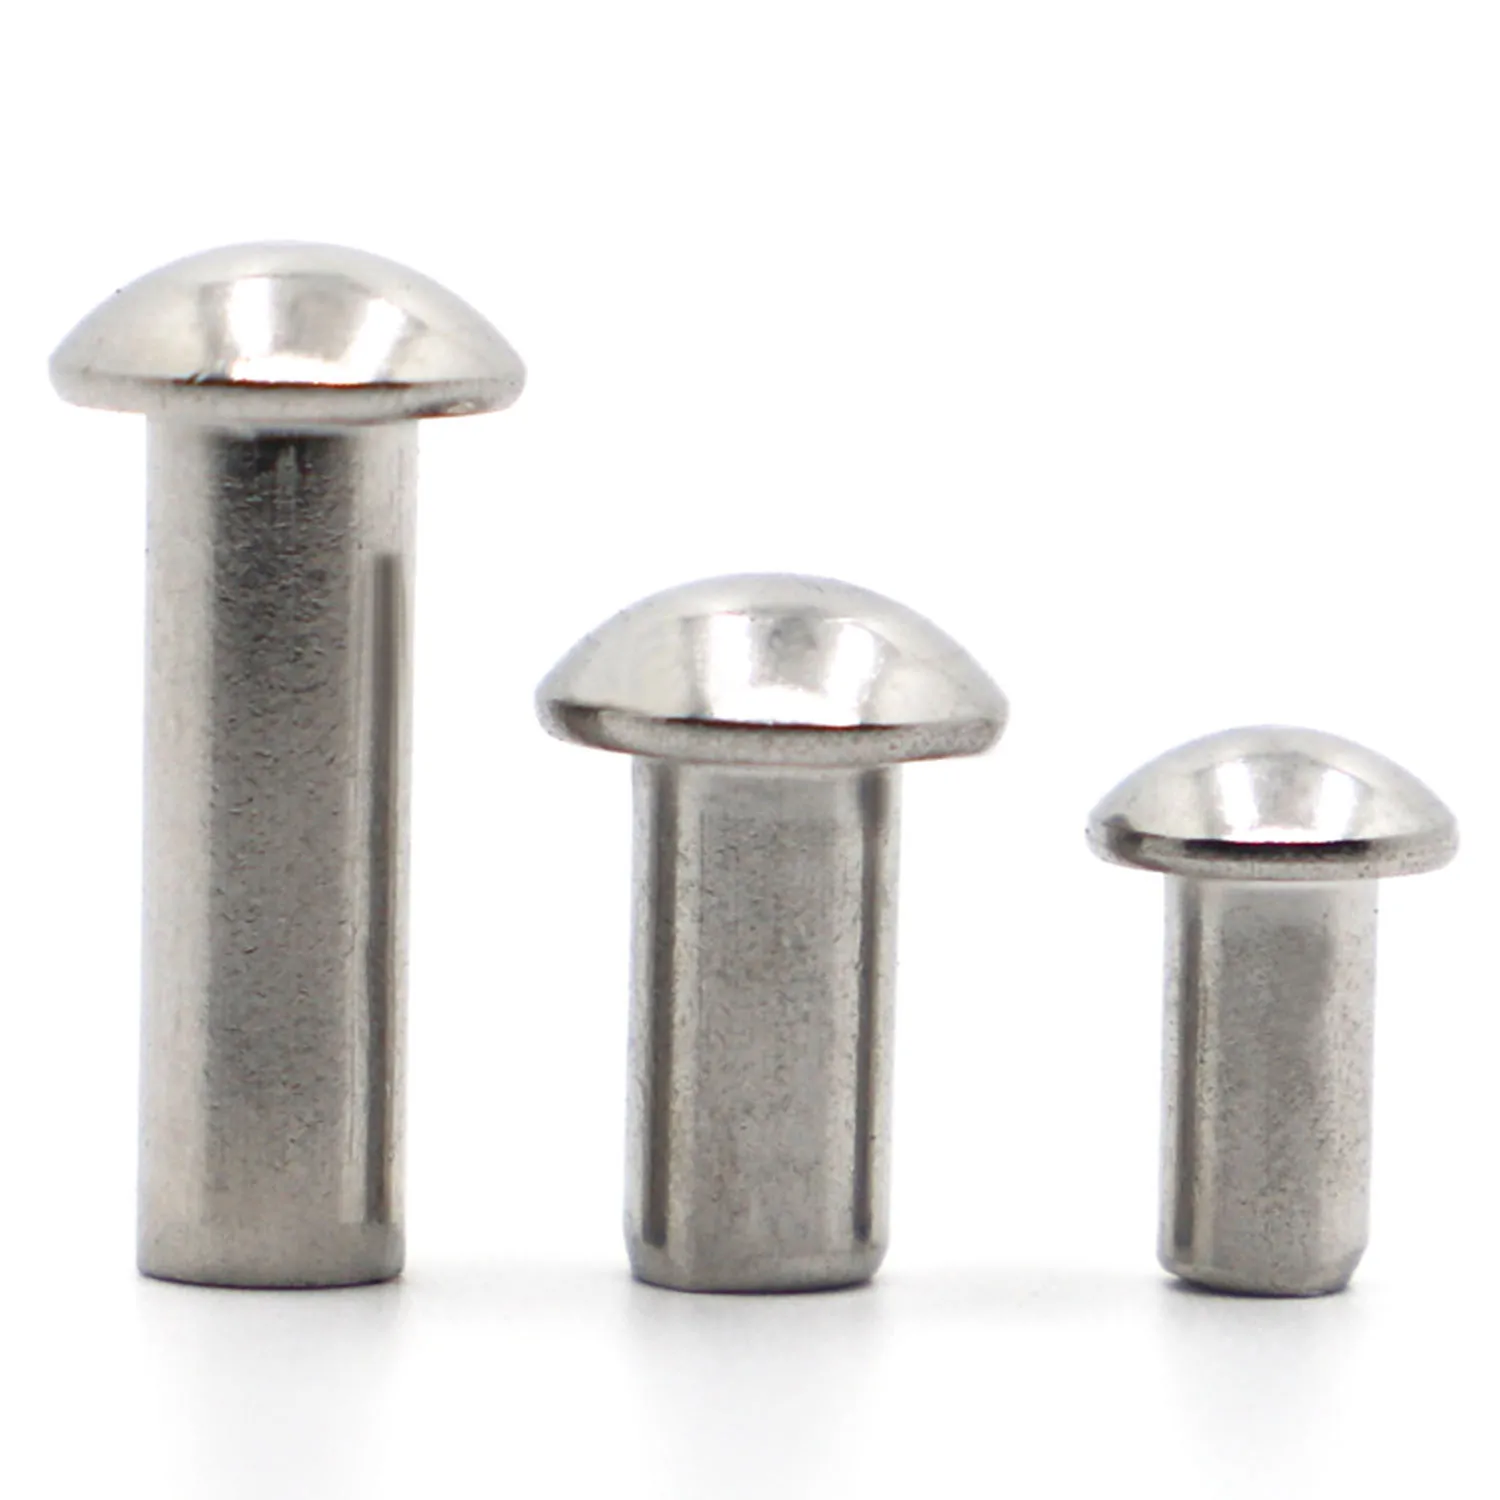 10-50pcs 304 Stainless Steel Solid Round Head Rivet M0.8 M1 M1.2 M1.4 M1.6 M2 M2.5 M3 M4 M5 M6 Alloy Self-plugging Rivet GB867